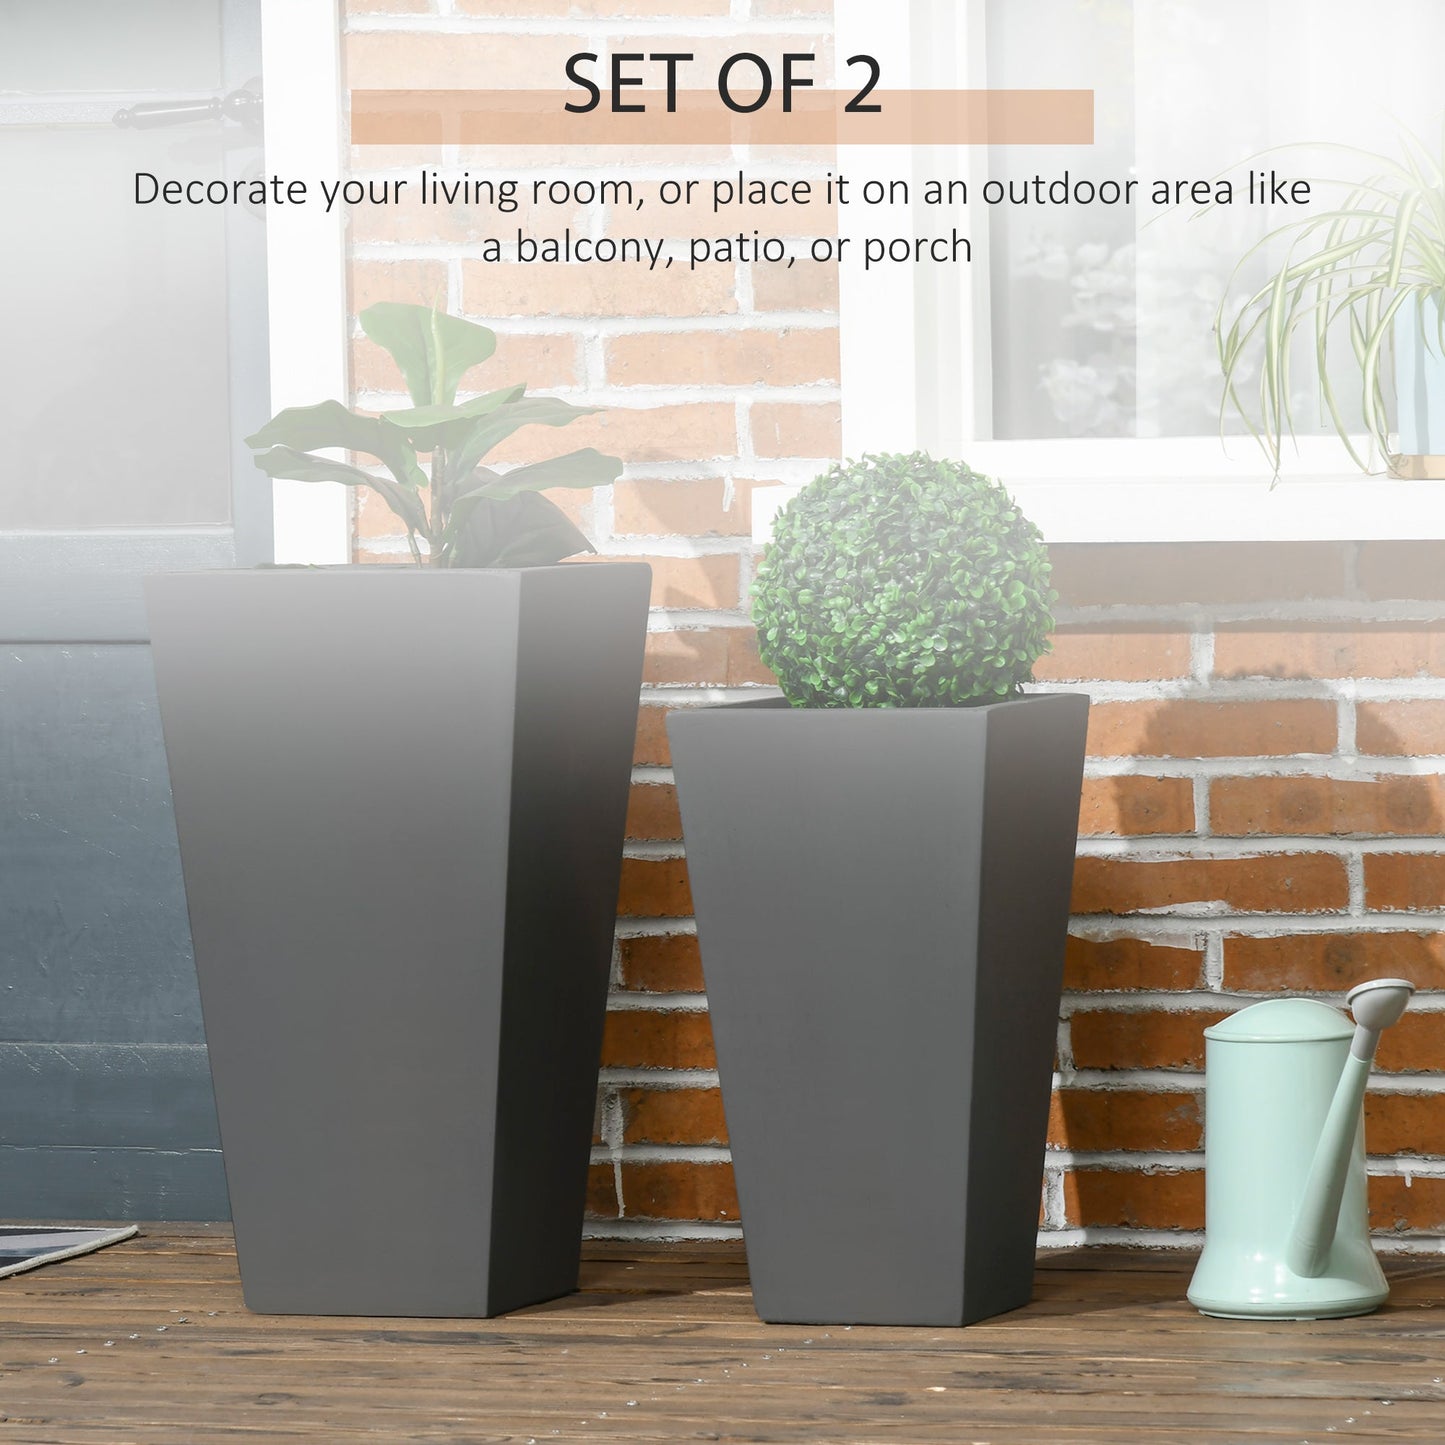 Outdoor and Garden-2-Pack Outdoor Planter Set, MgO Flower Pots with Drainage Holes, Durable & Stackable, for Entryway, Patio, Yard, Garden, Gray - Outdoor Style Company